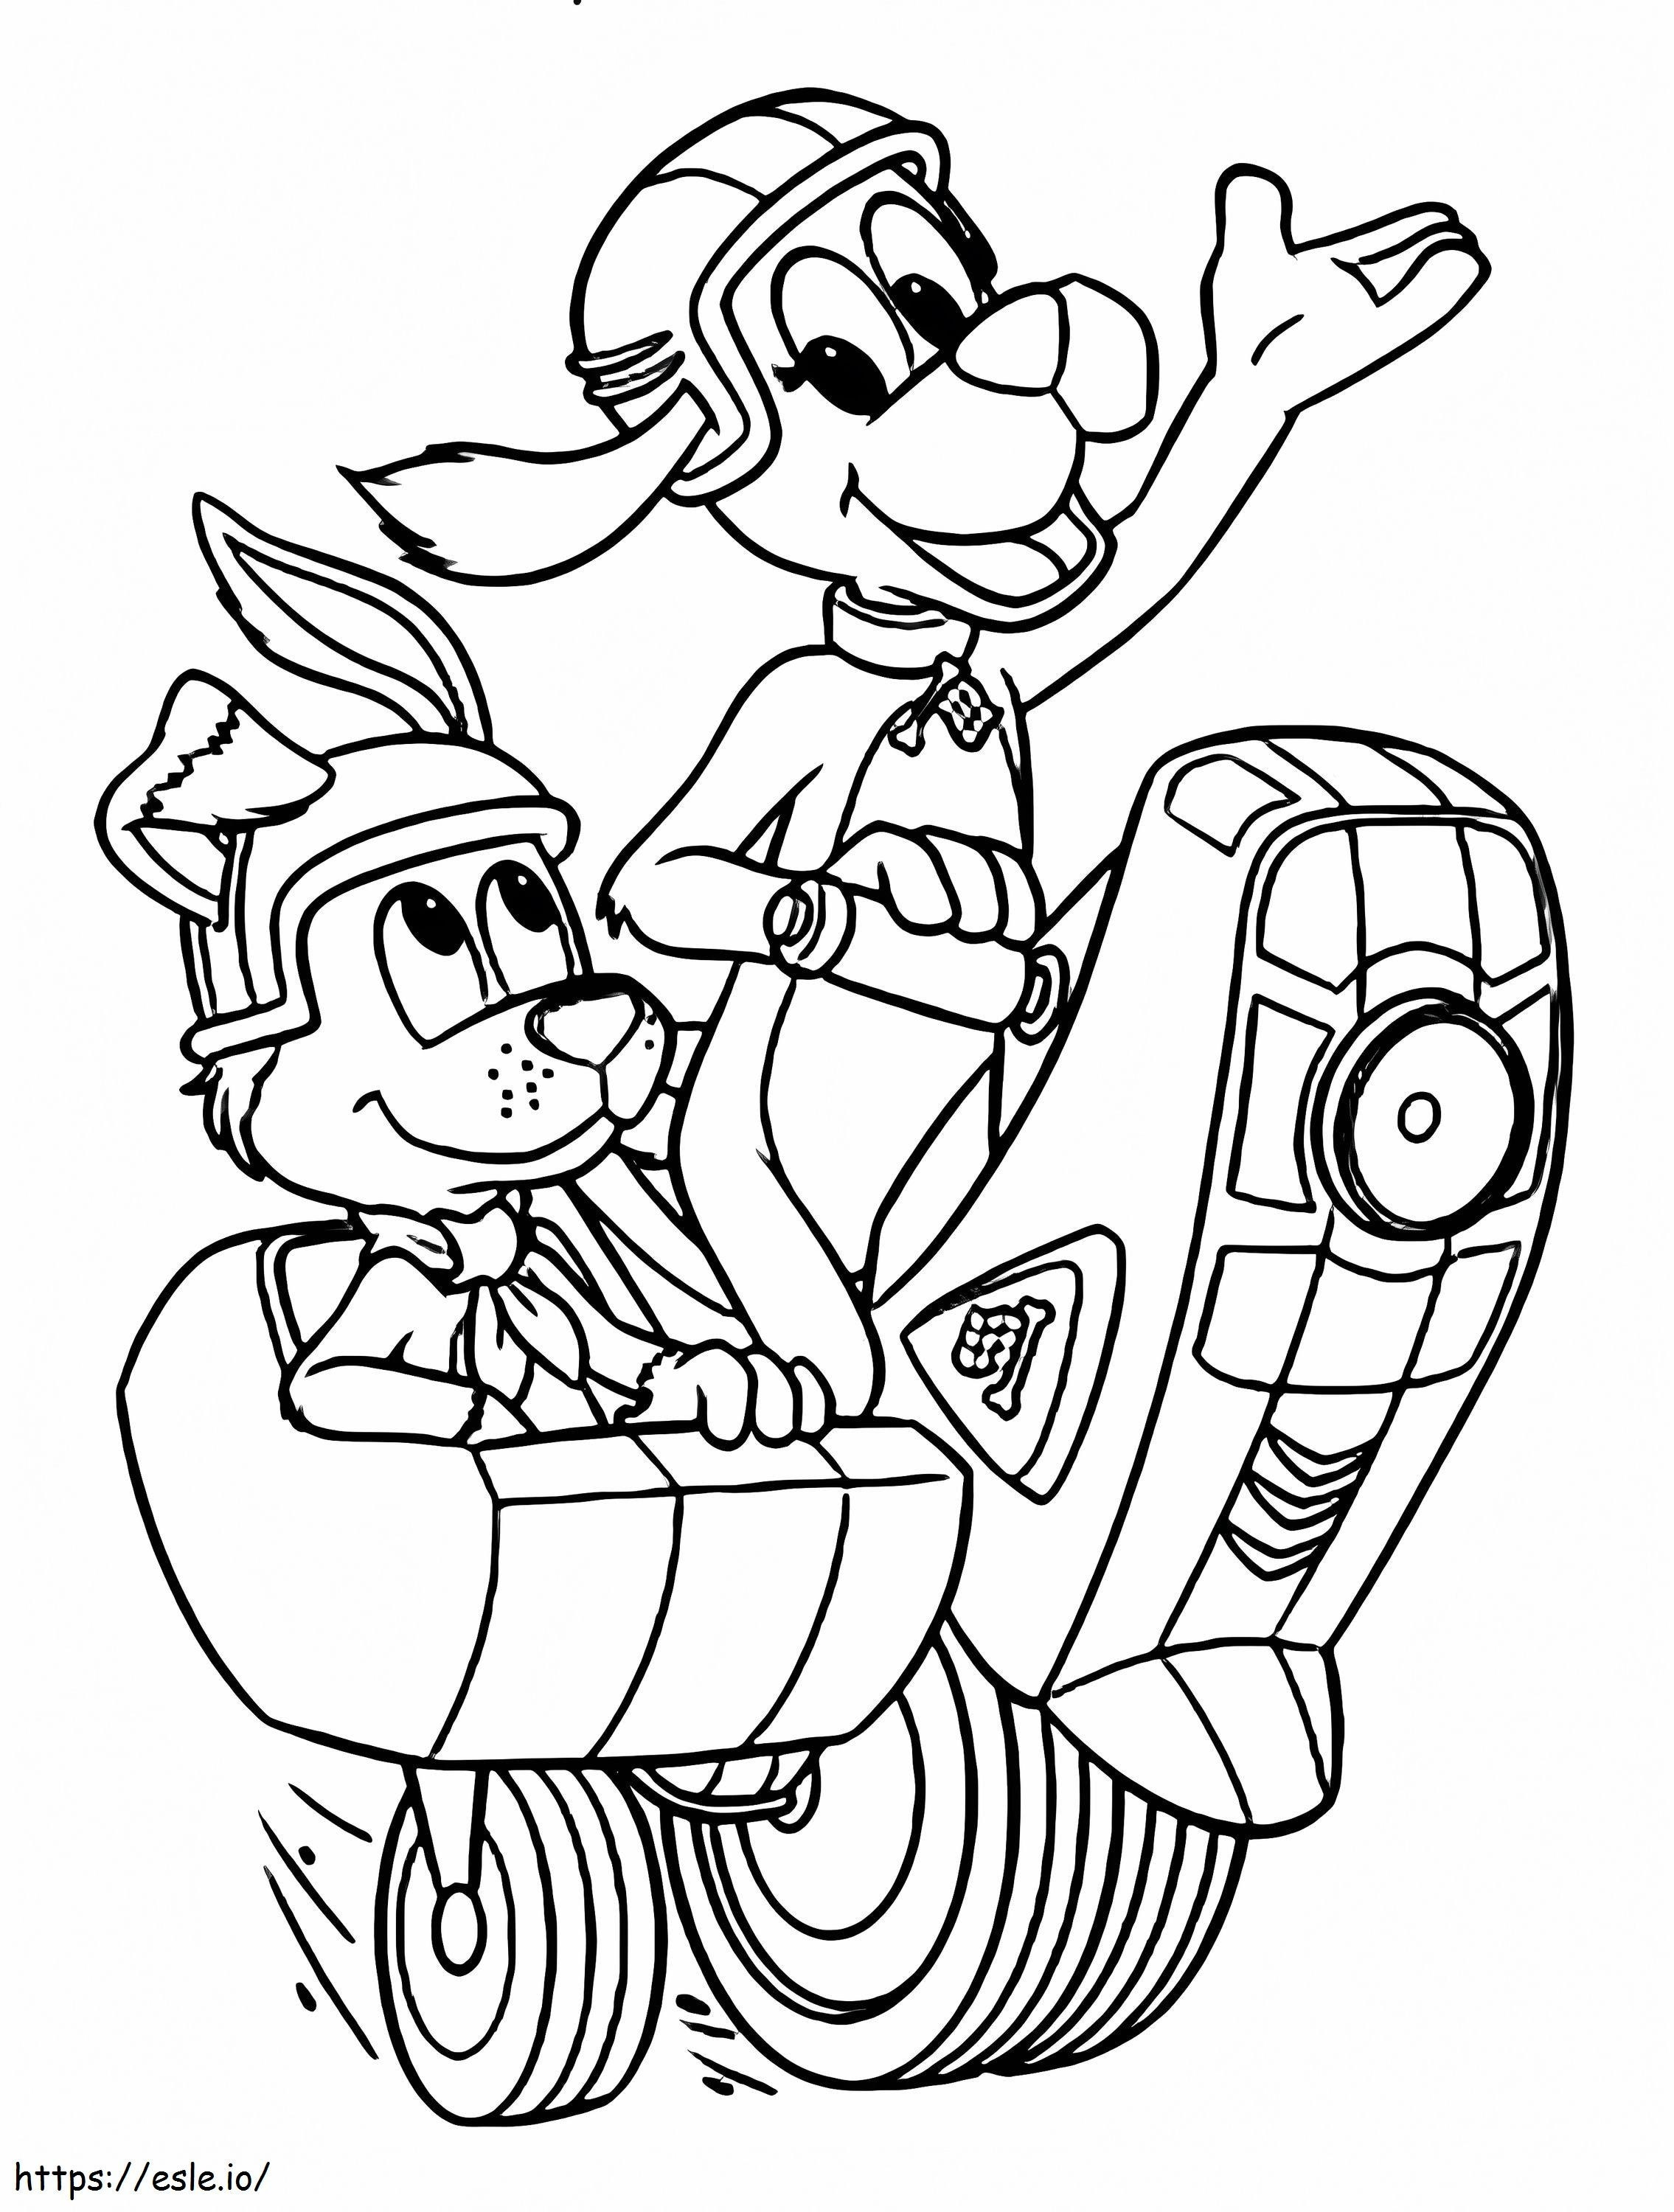 Go Dog Go 6 coloring page